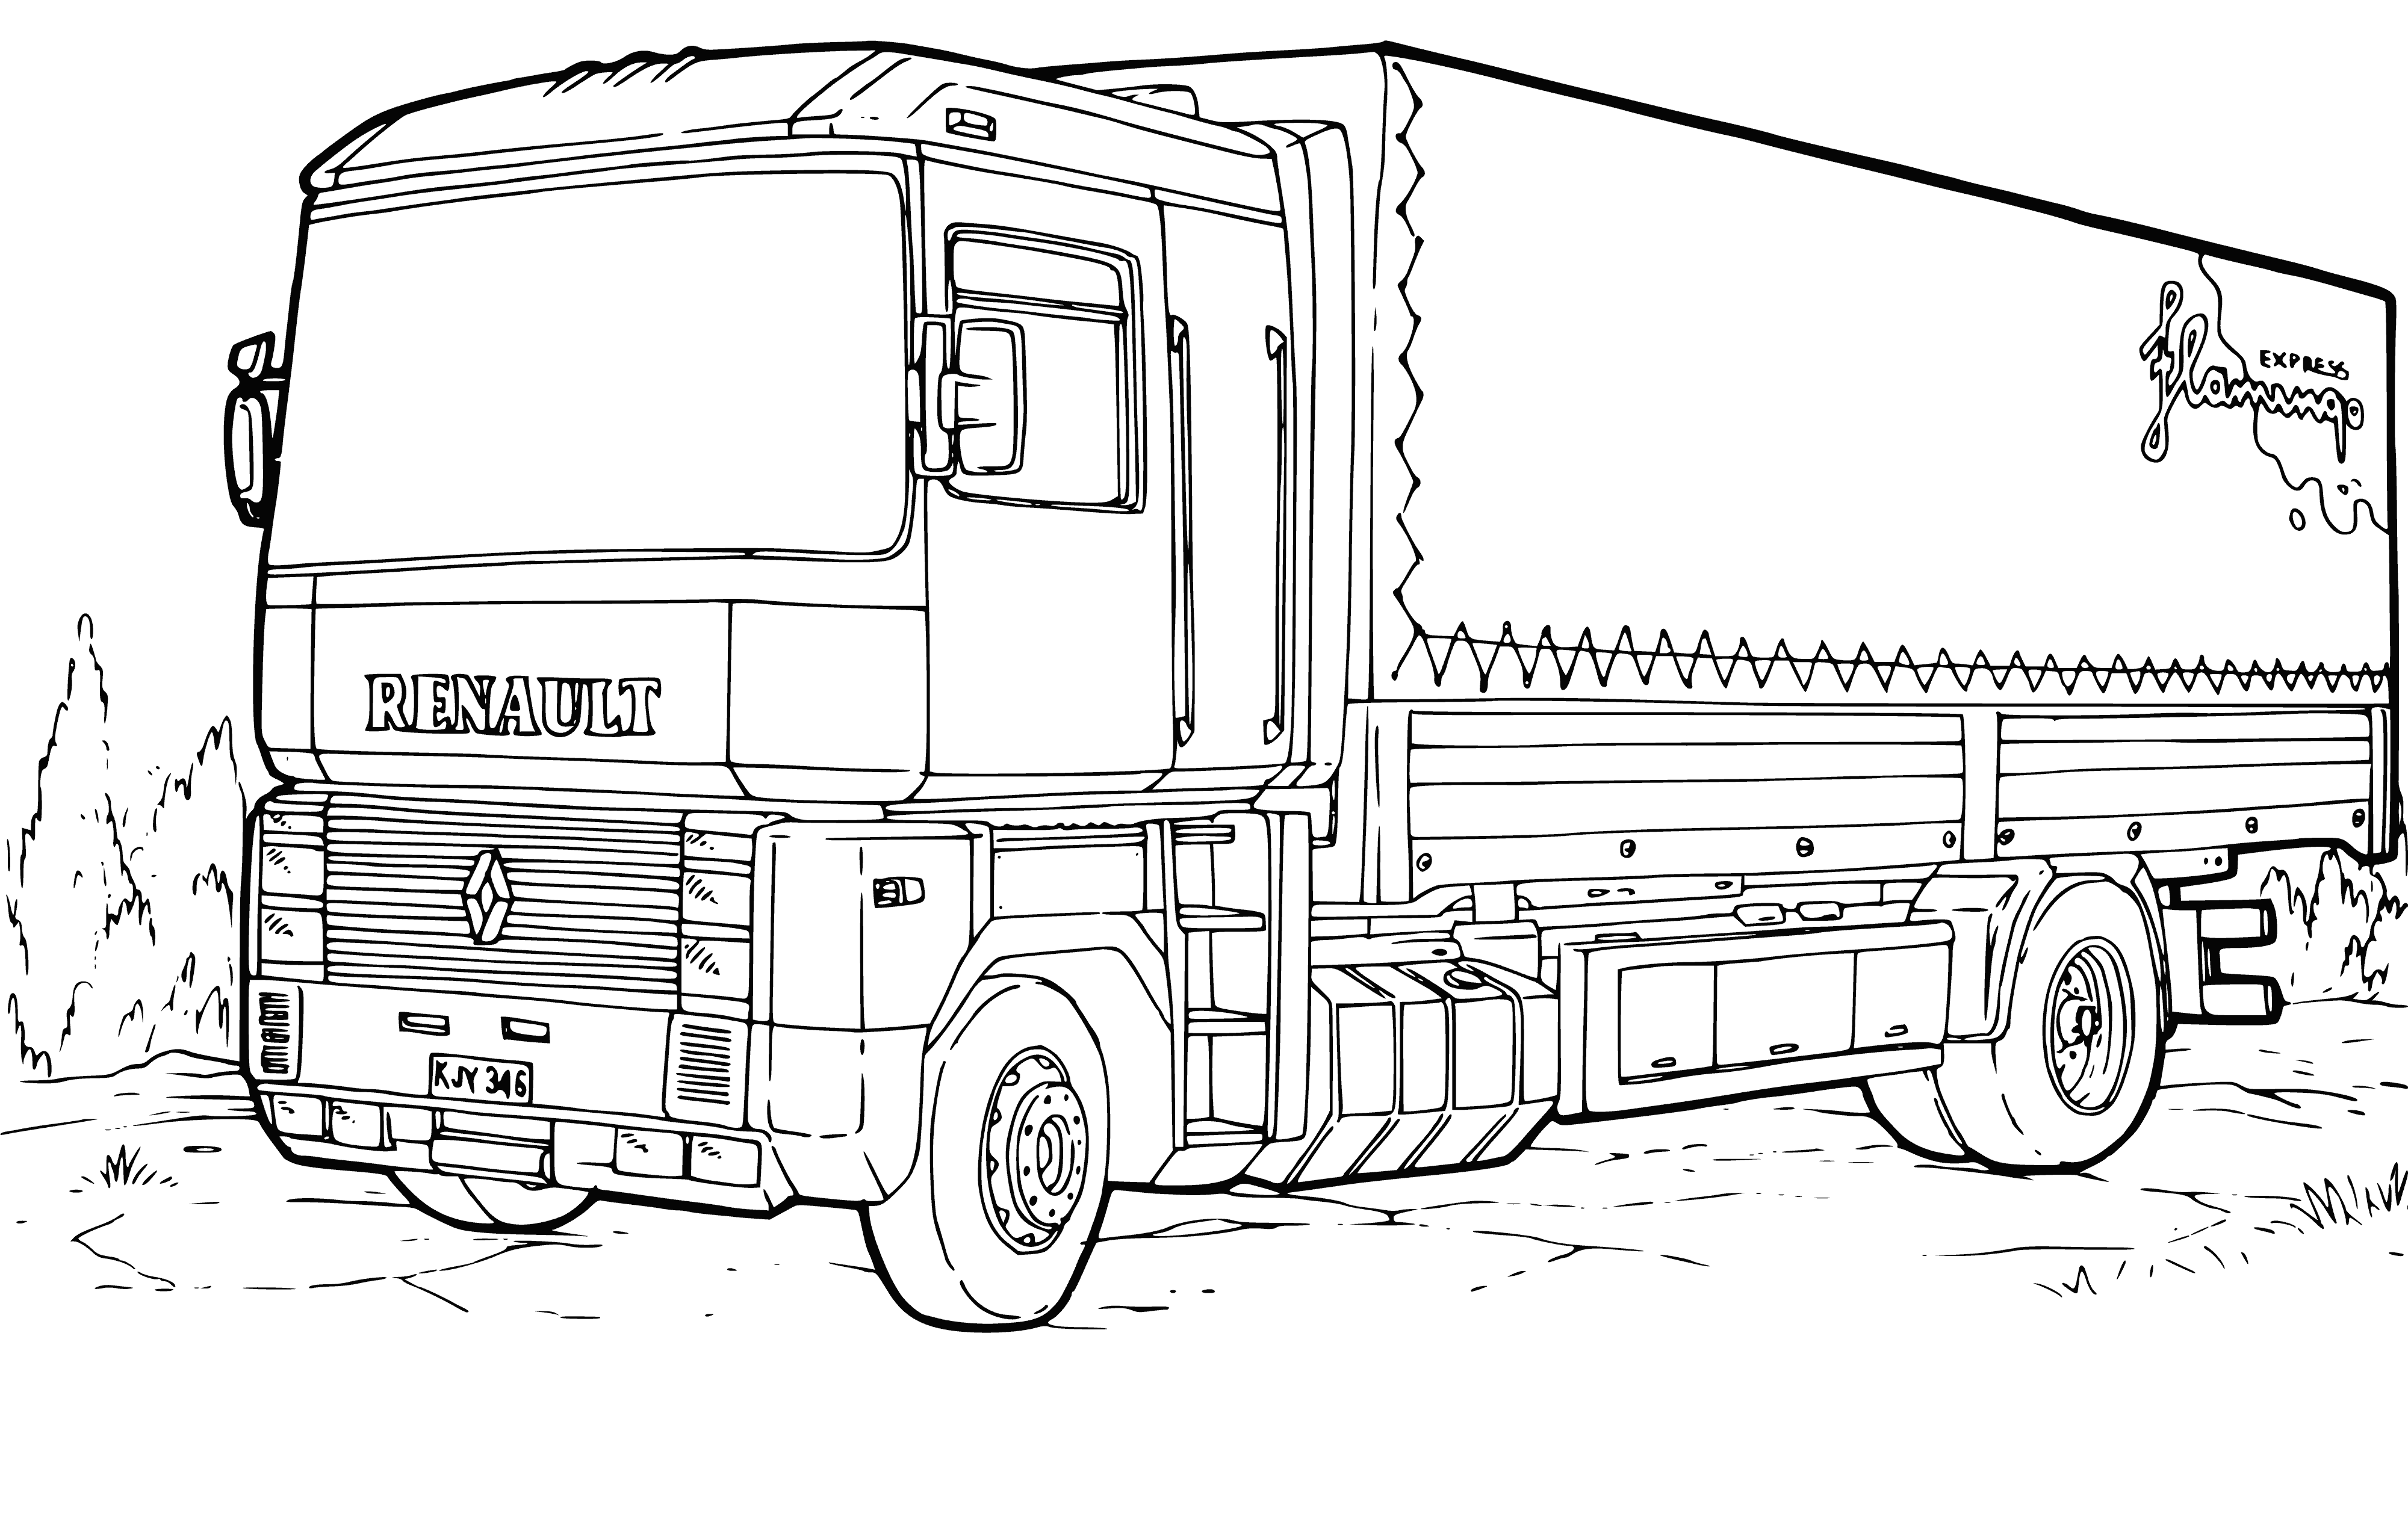 coloring page: Trucks of different colors with the Reno Magnum logo in a parking lot coloring page.